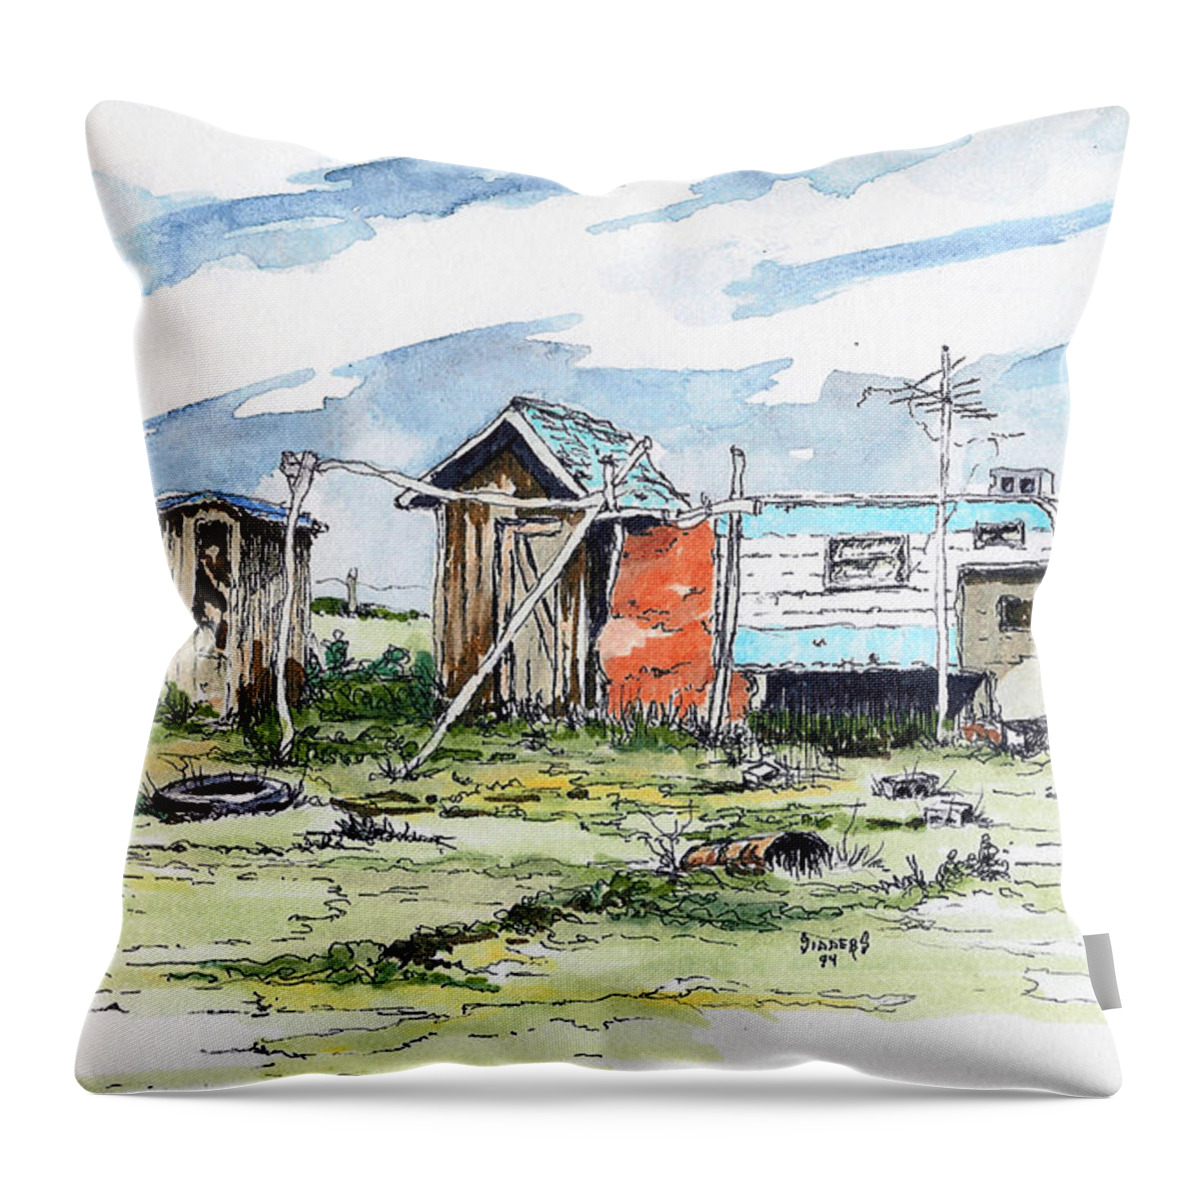 Economy Throw Pillow featuring the painting The New American Dream by Sam Sidders